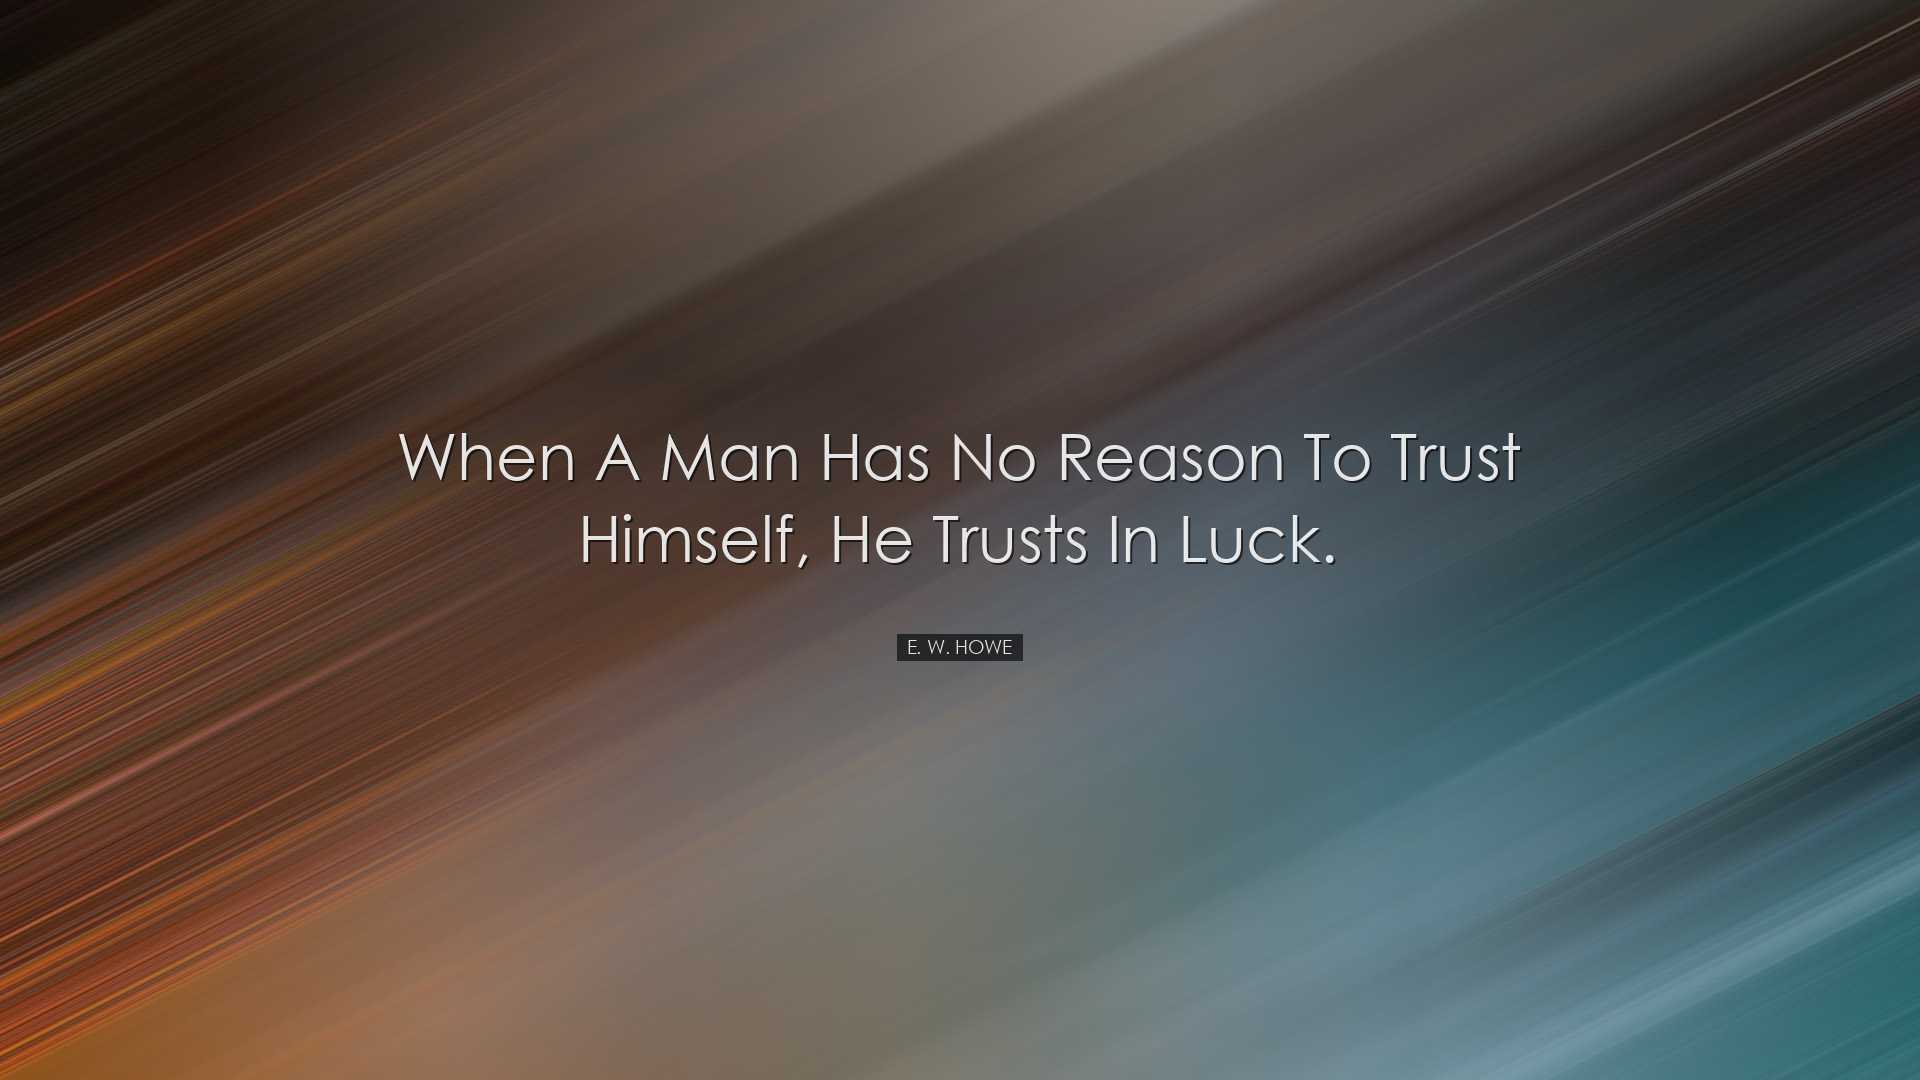 When a man has no reason to trust himself, he trusts in luck. - E.